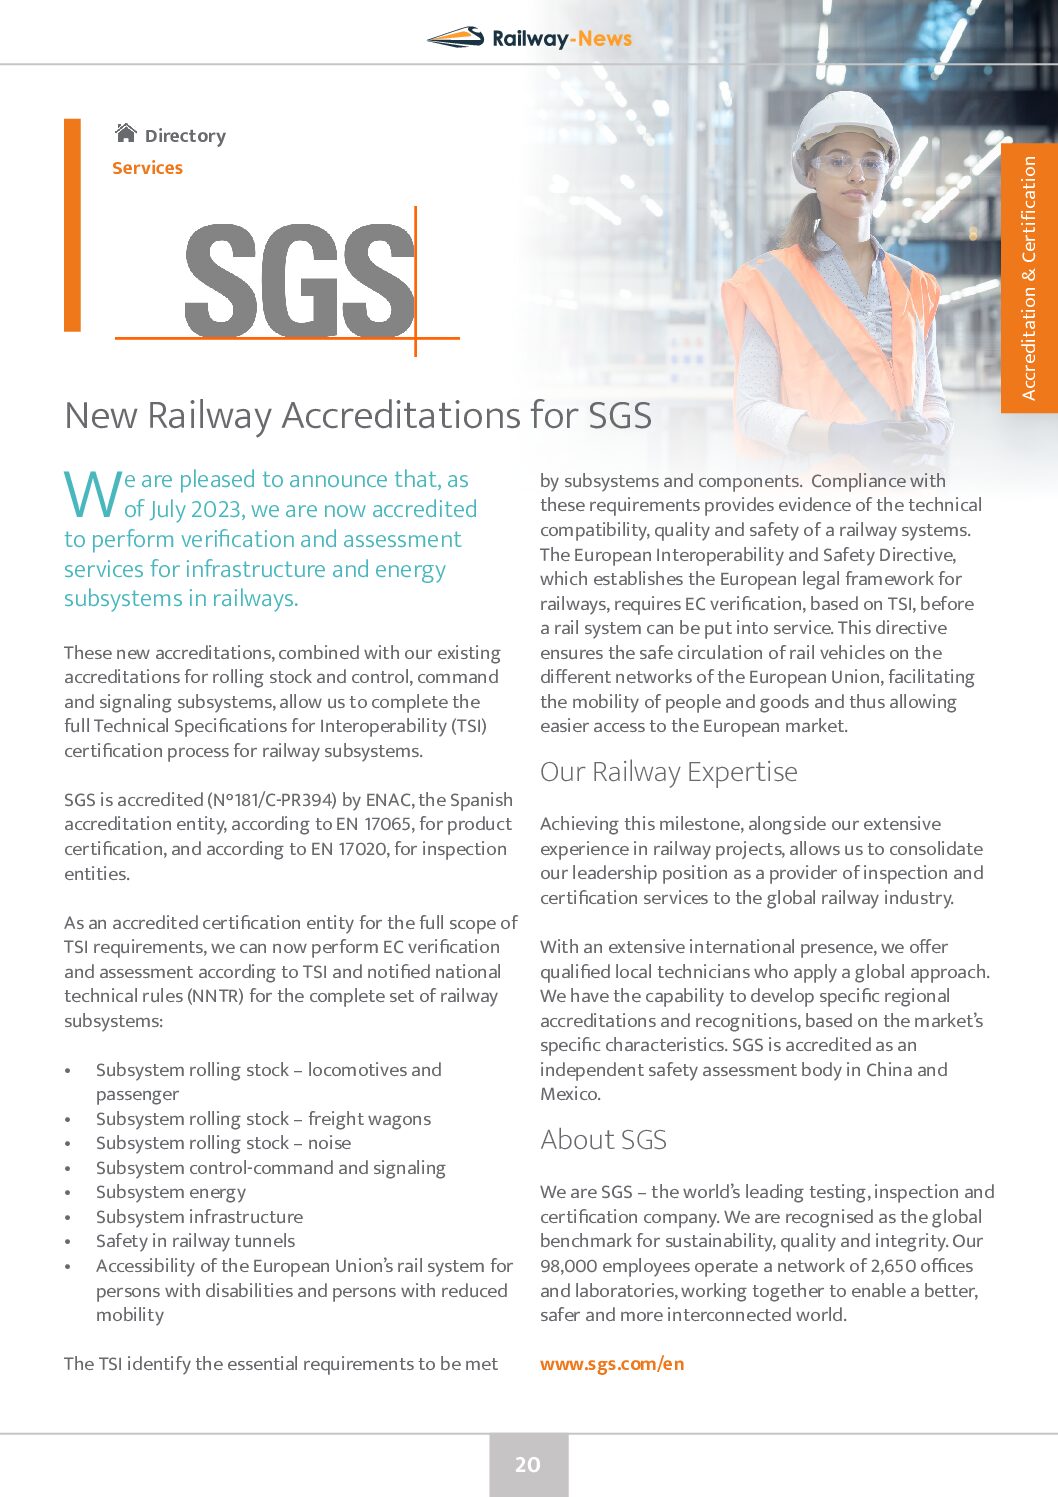 New Railway Accreditations for SGS